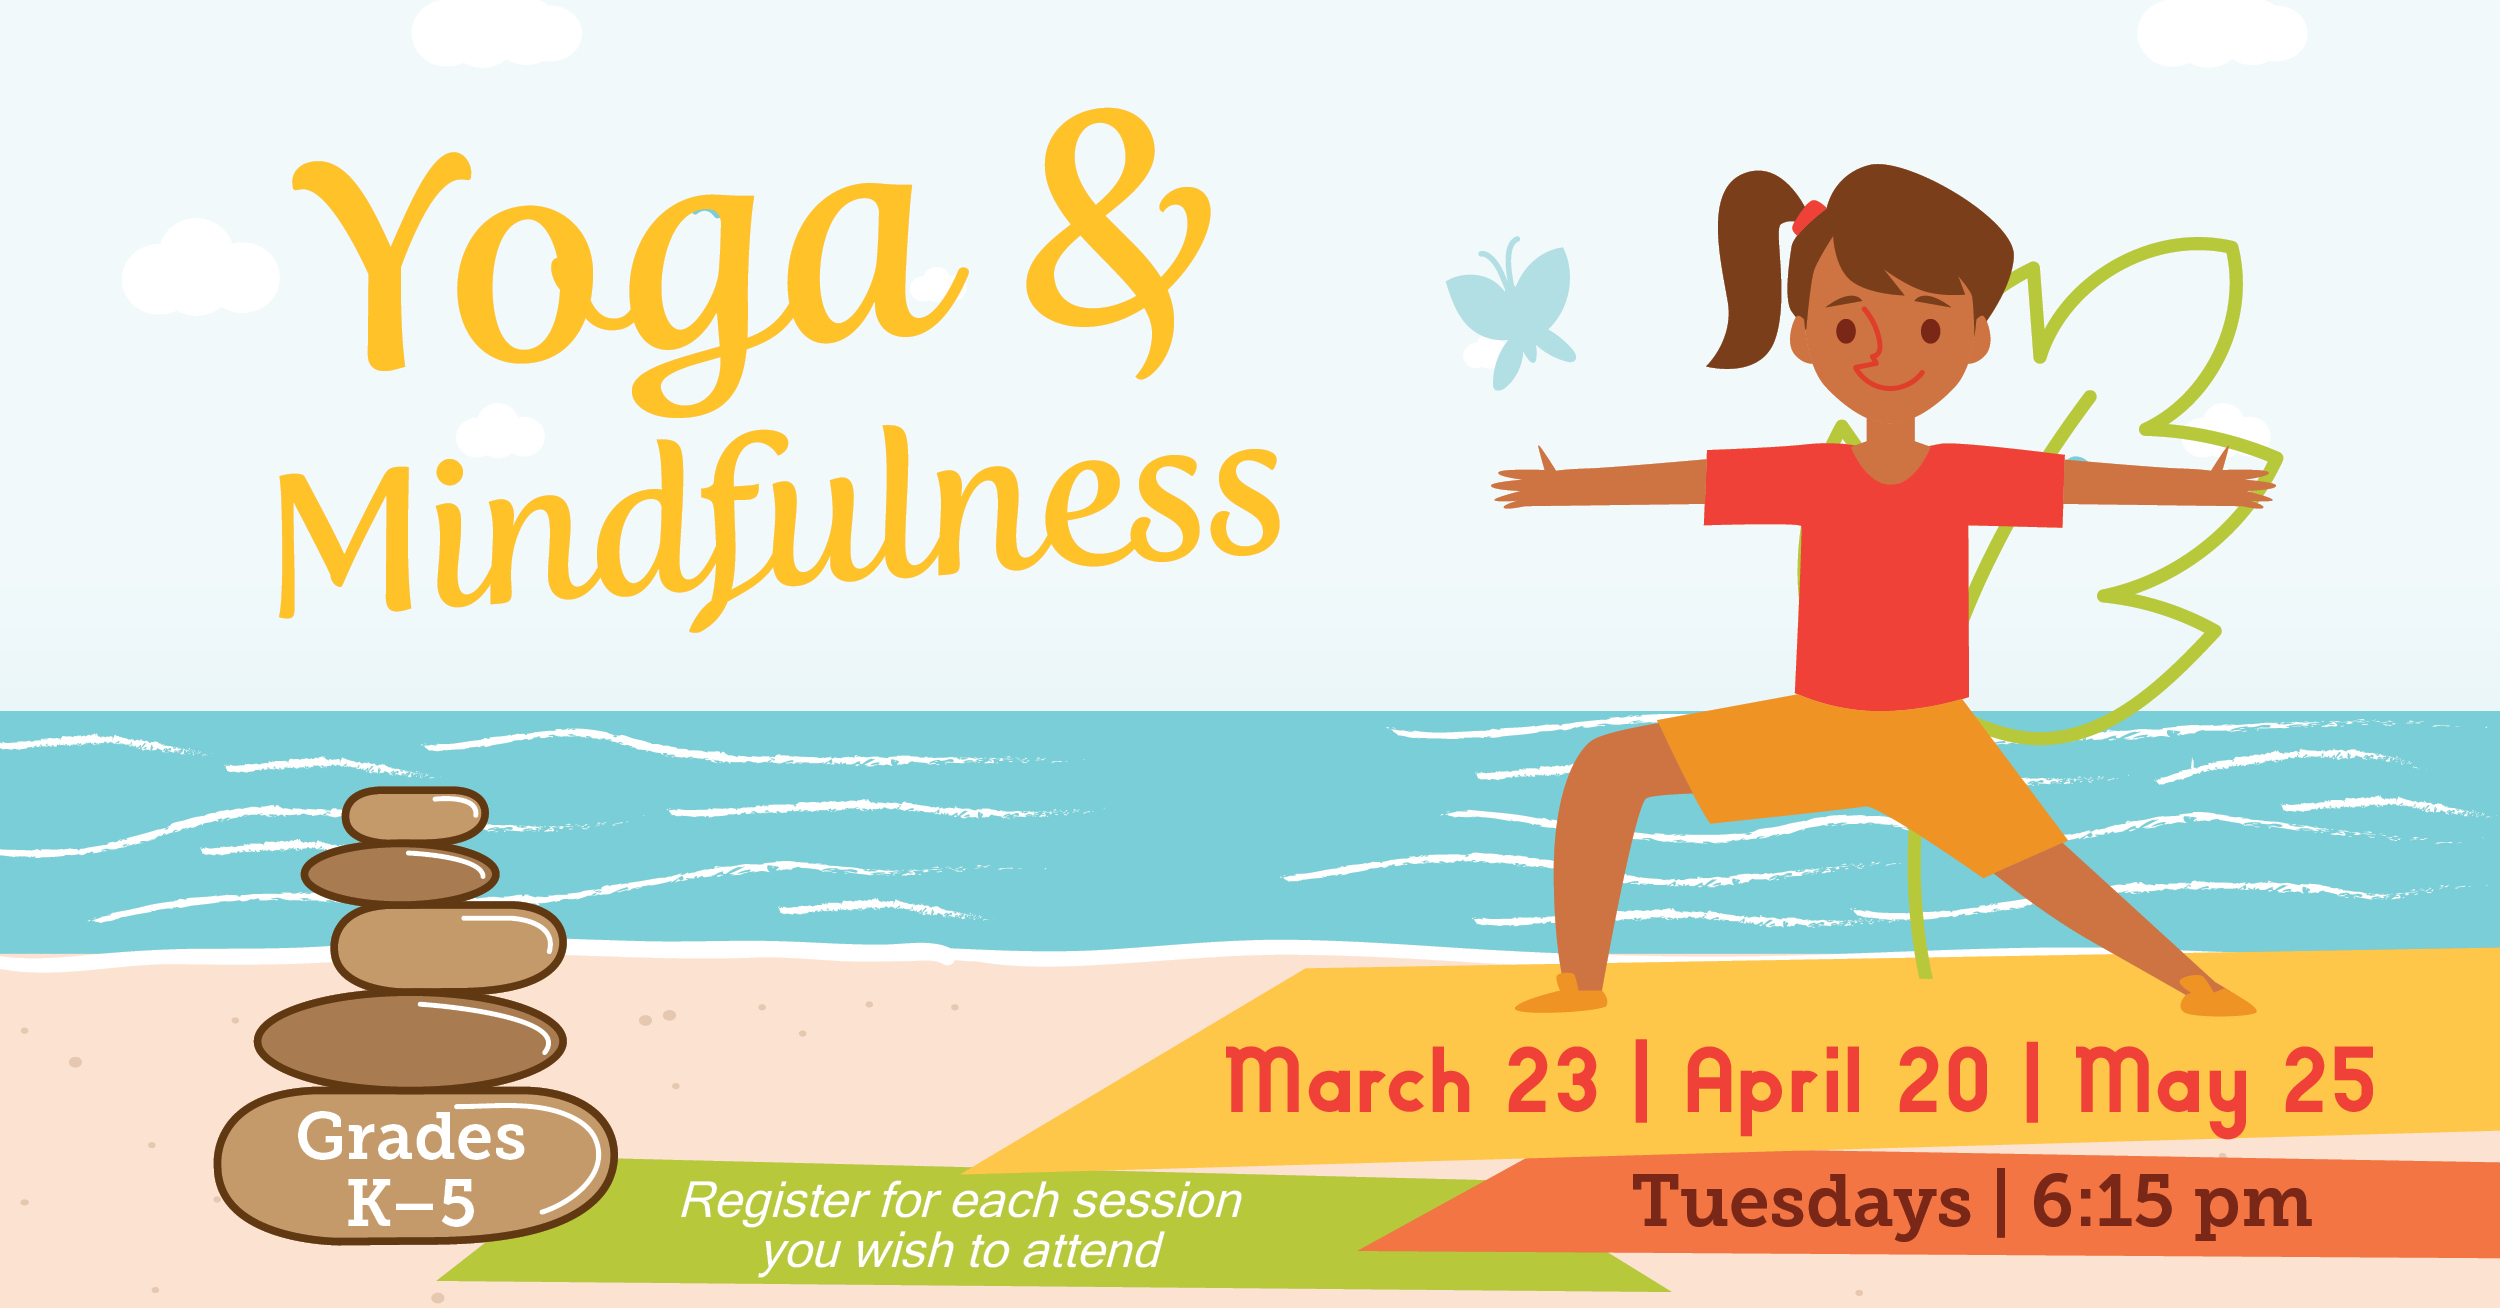 Yoga and Mindfulness. Tuesdays March 23, April 20, May 25 at 6:15pm. Grades three to five. Register for each session you wish to attend. 